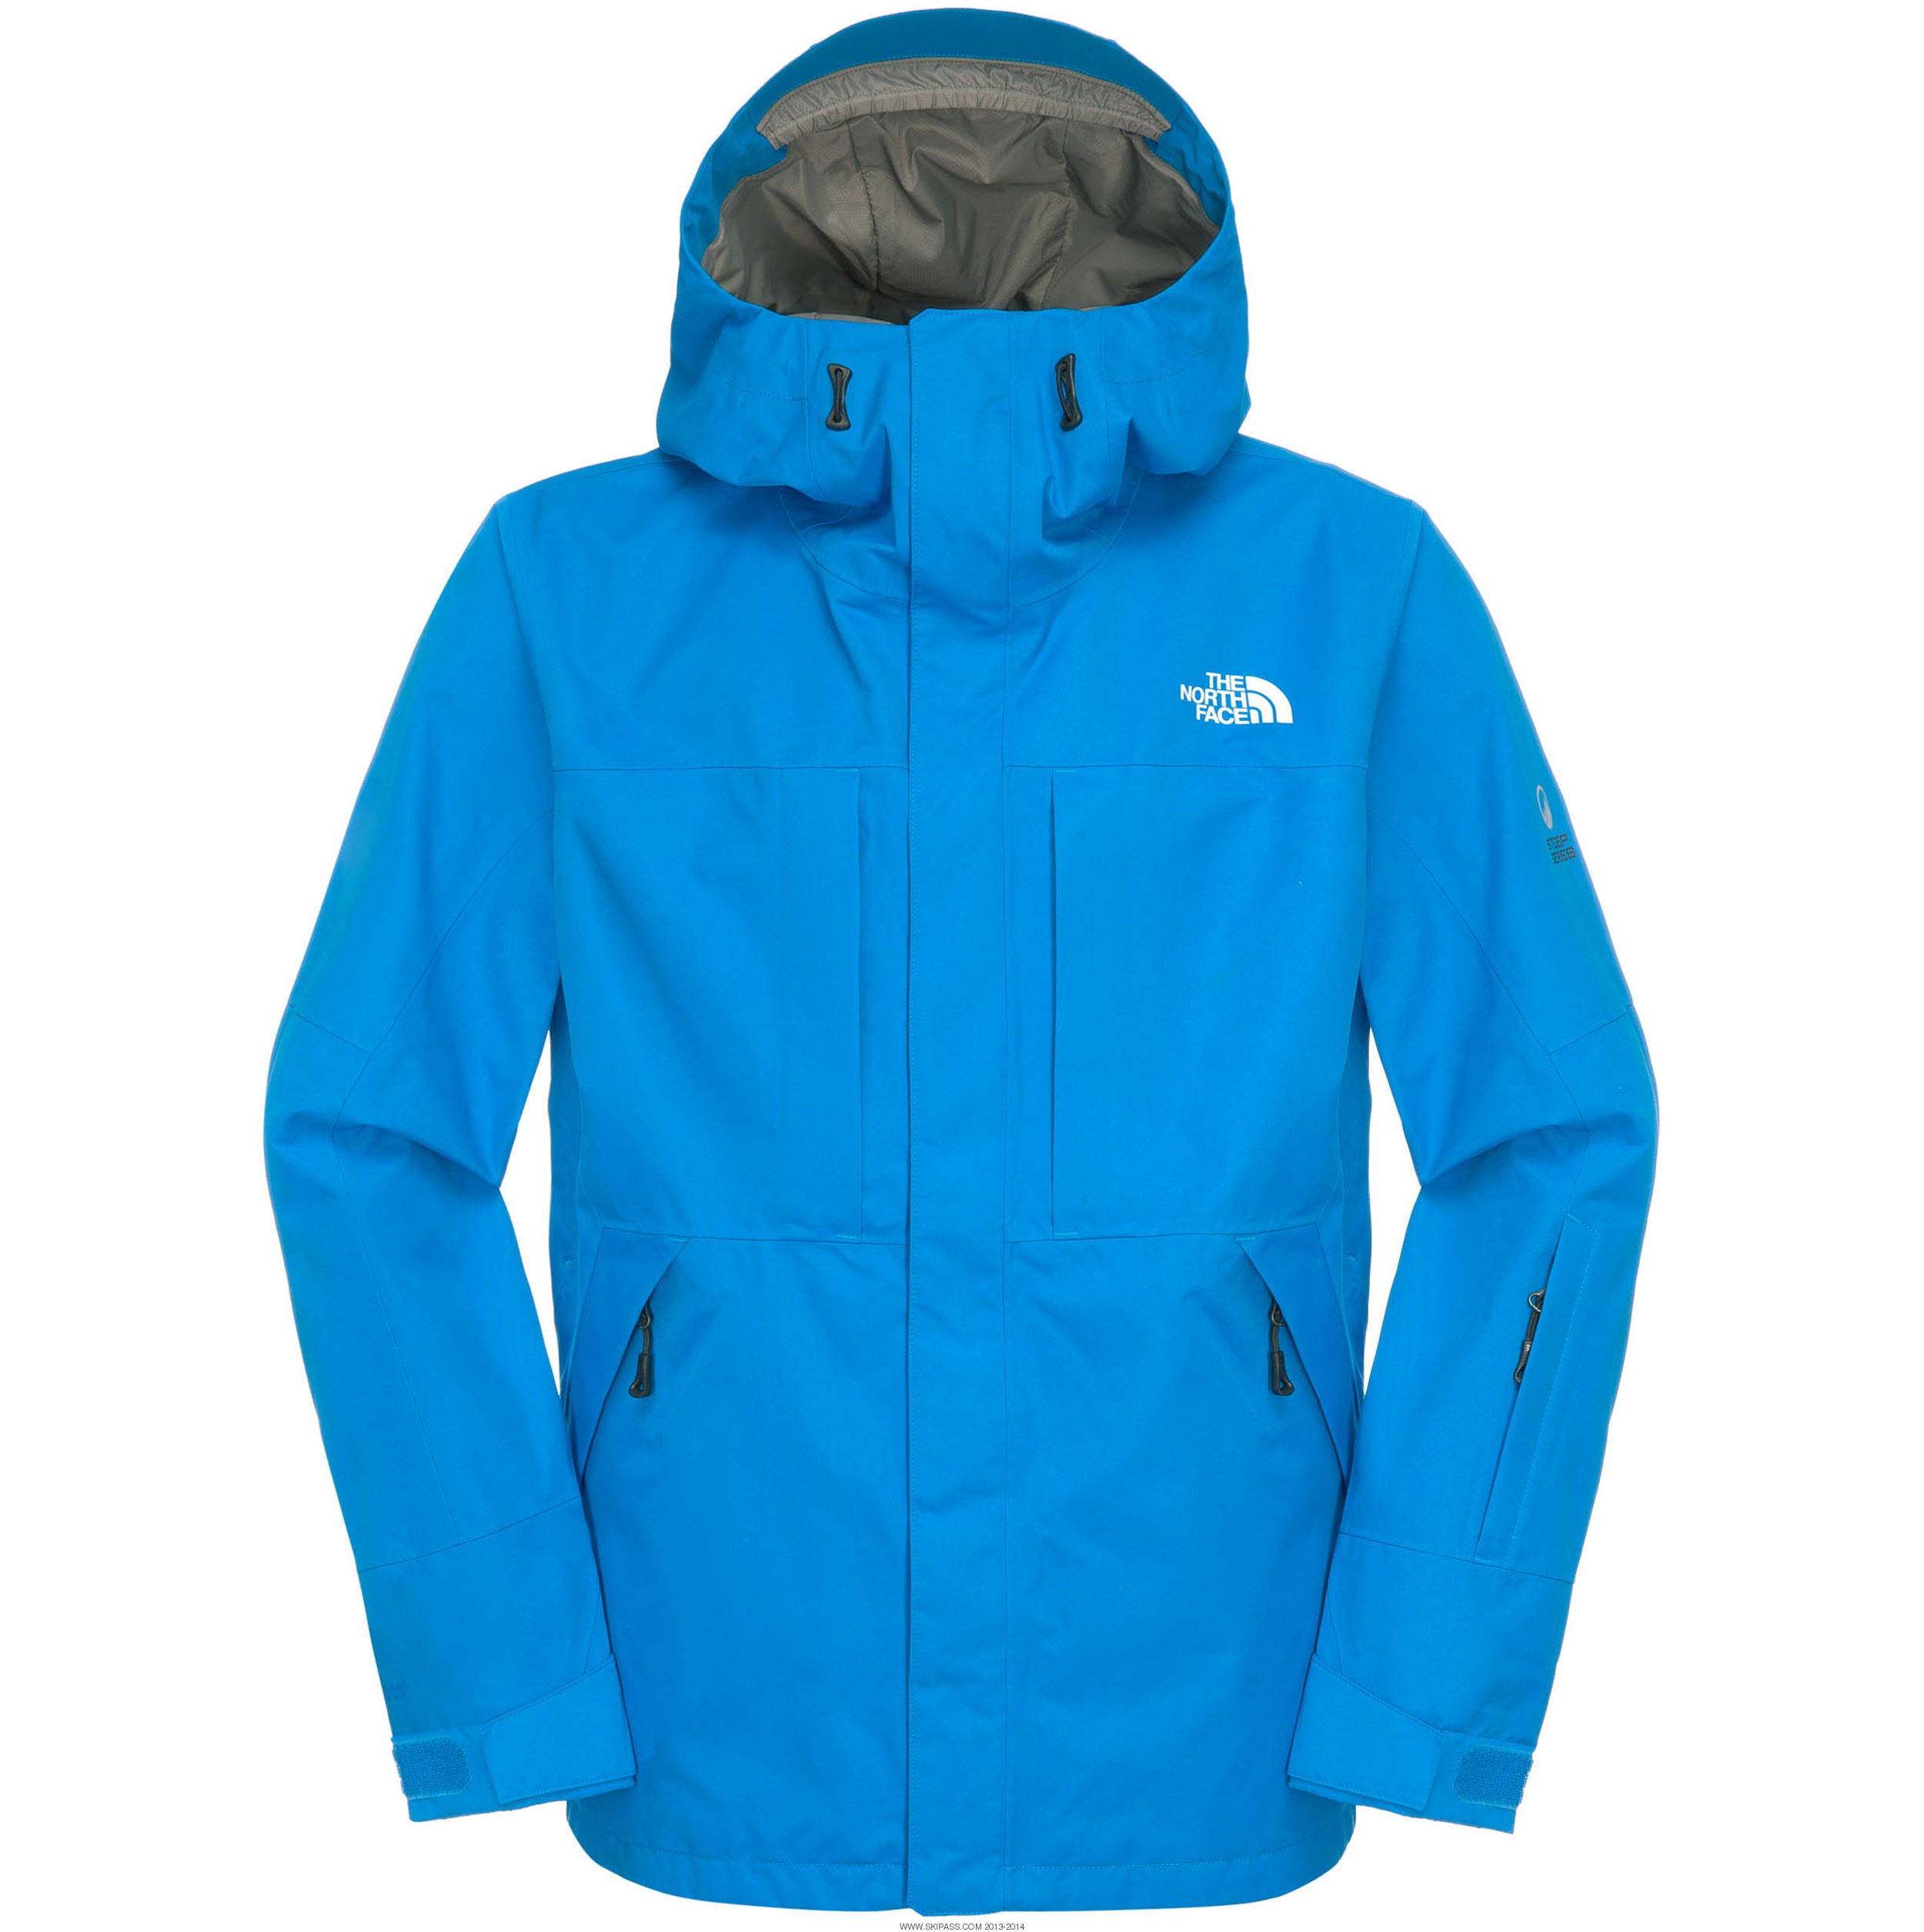 The North Face - nfz 2014